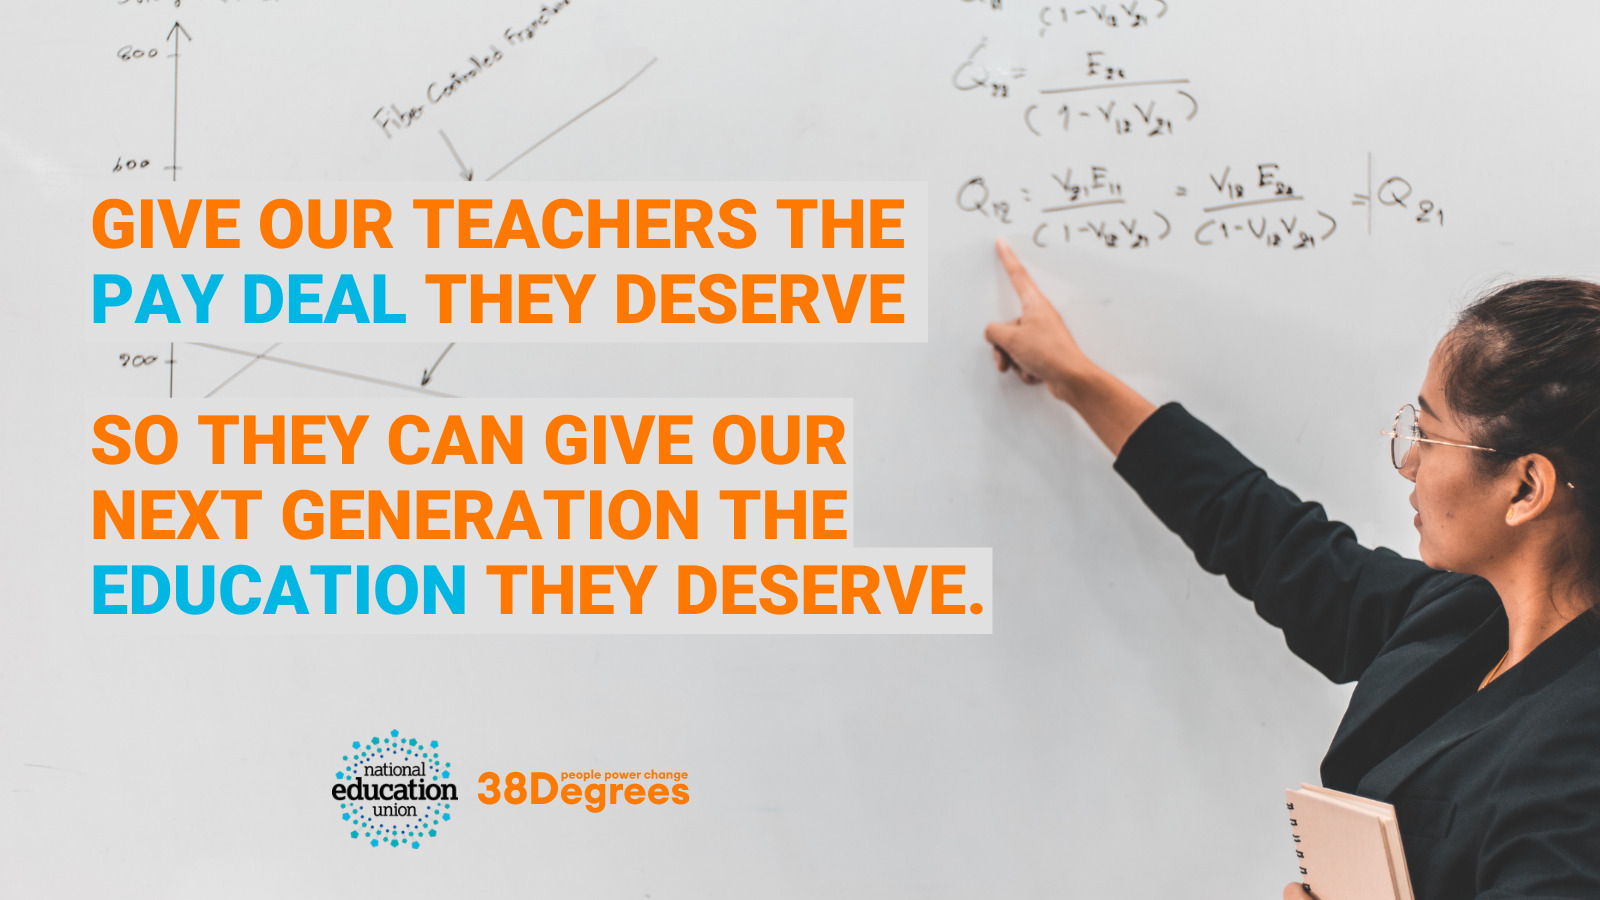 An image of a teacher writing on a board - orange and blue text over the image says "give our teacher the pay deal the deserve so they can give our next generation the education they deserve.